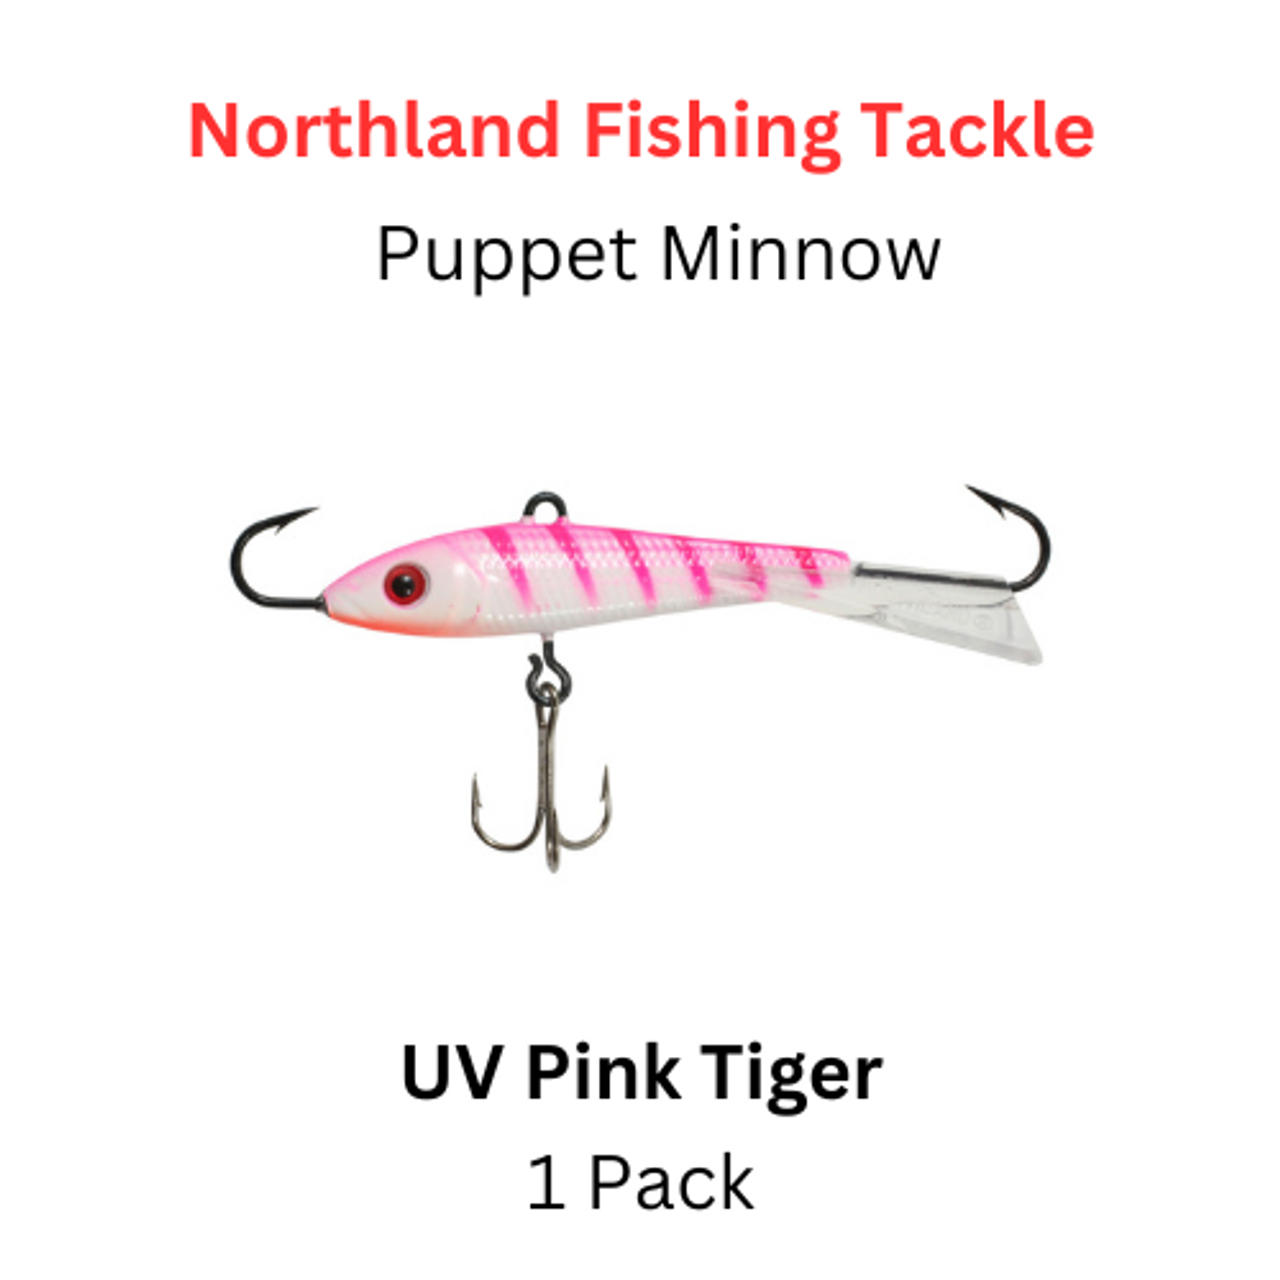 NORTHLAND FISHING TACKLE: 9/16 oz Puppet Minnow UV PINK TIGER